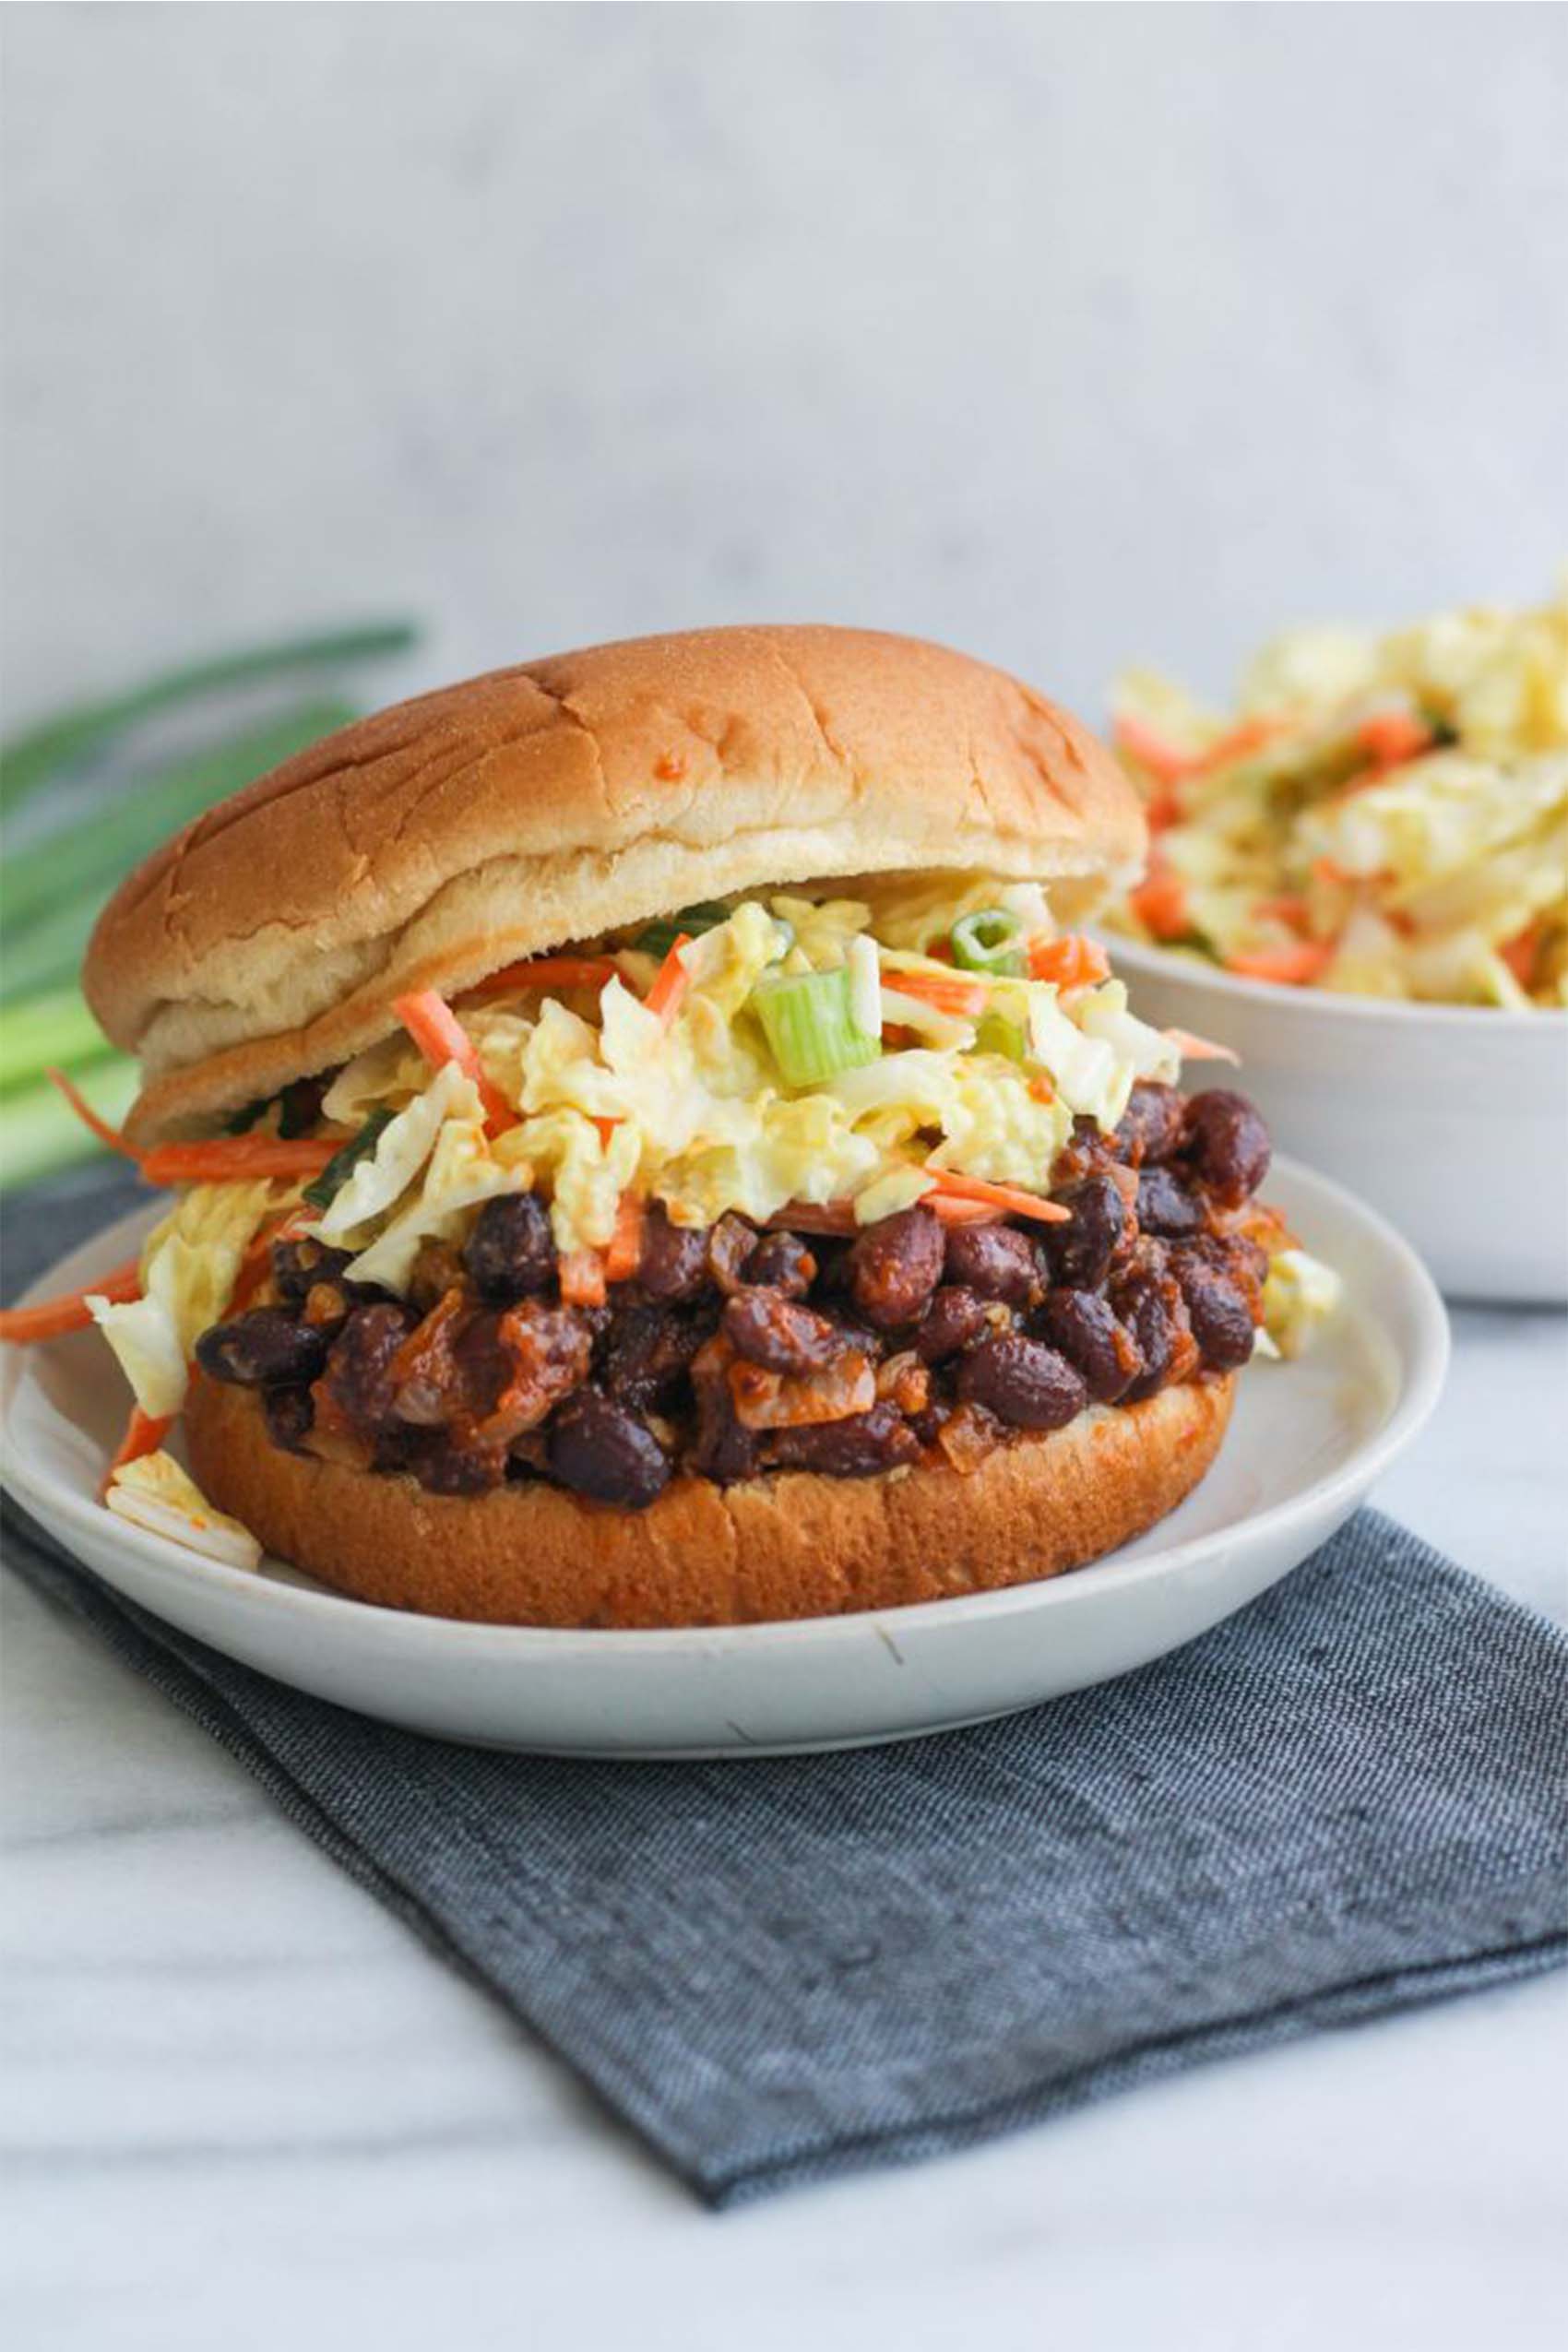 a black bean sandwich topped with slaw